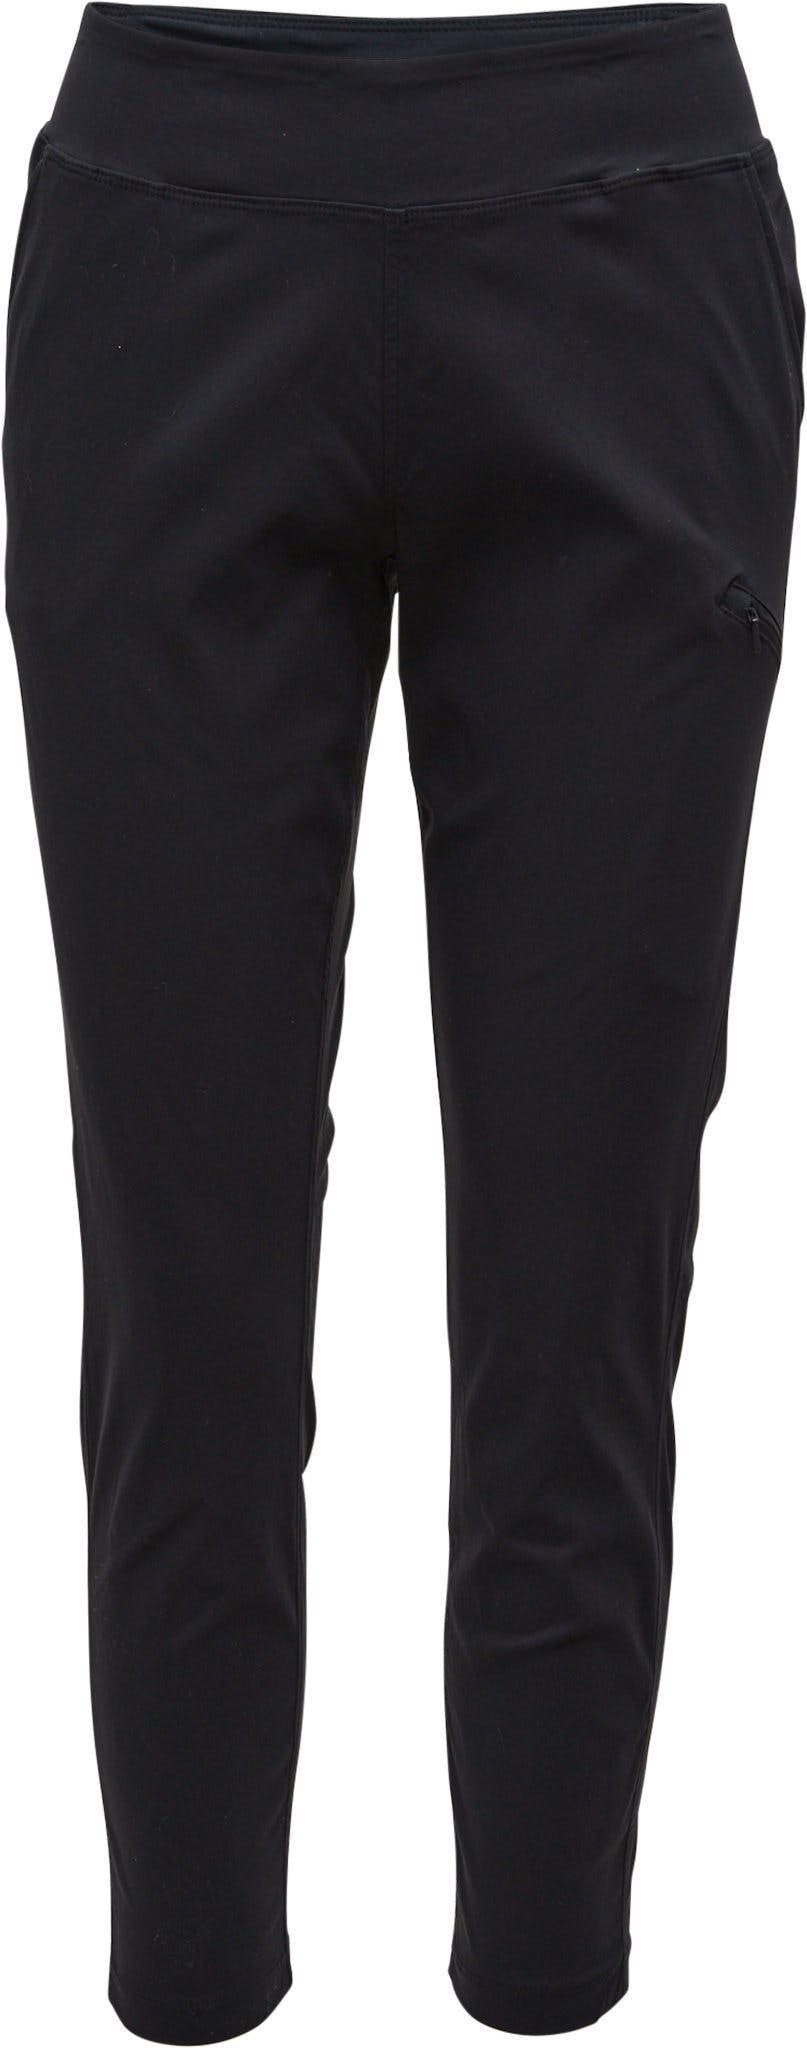 Product image for Dynama/2 Ankle Pants - Women's